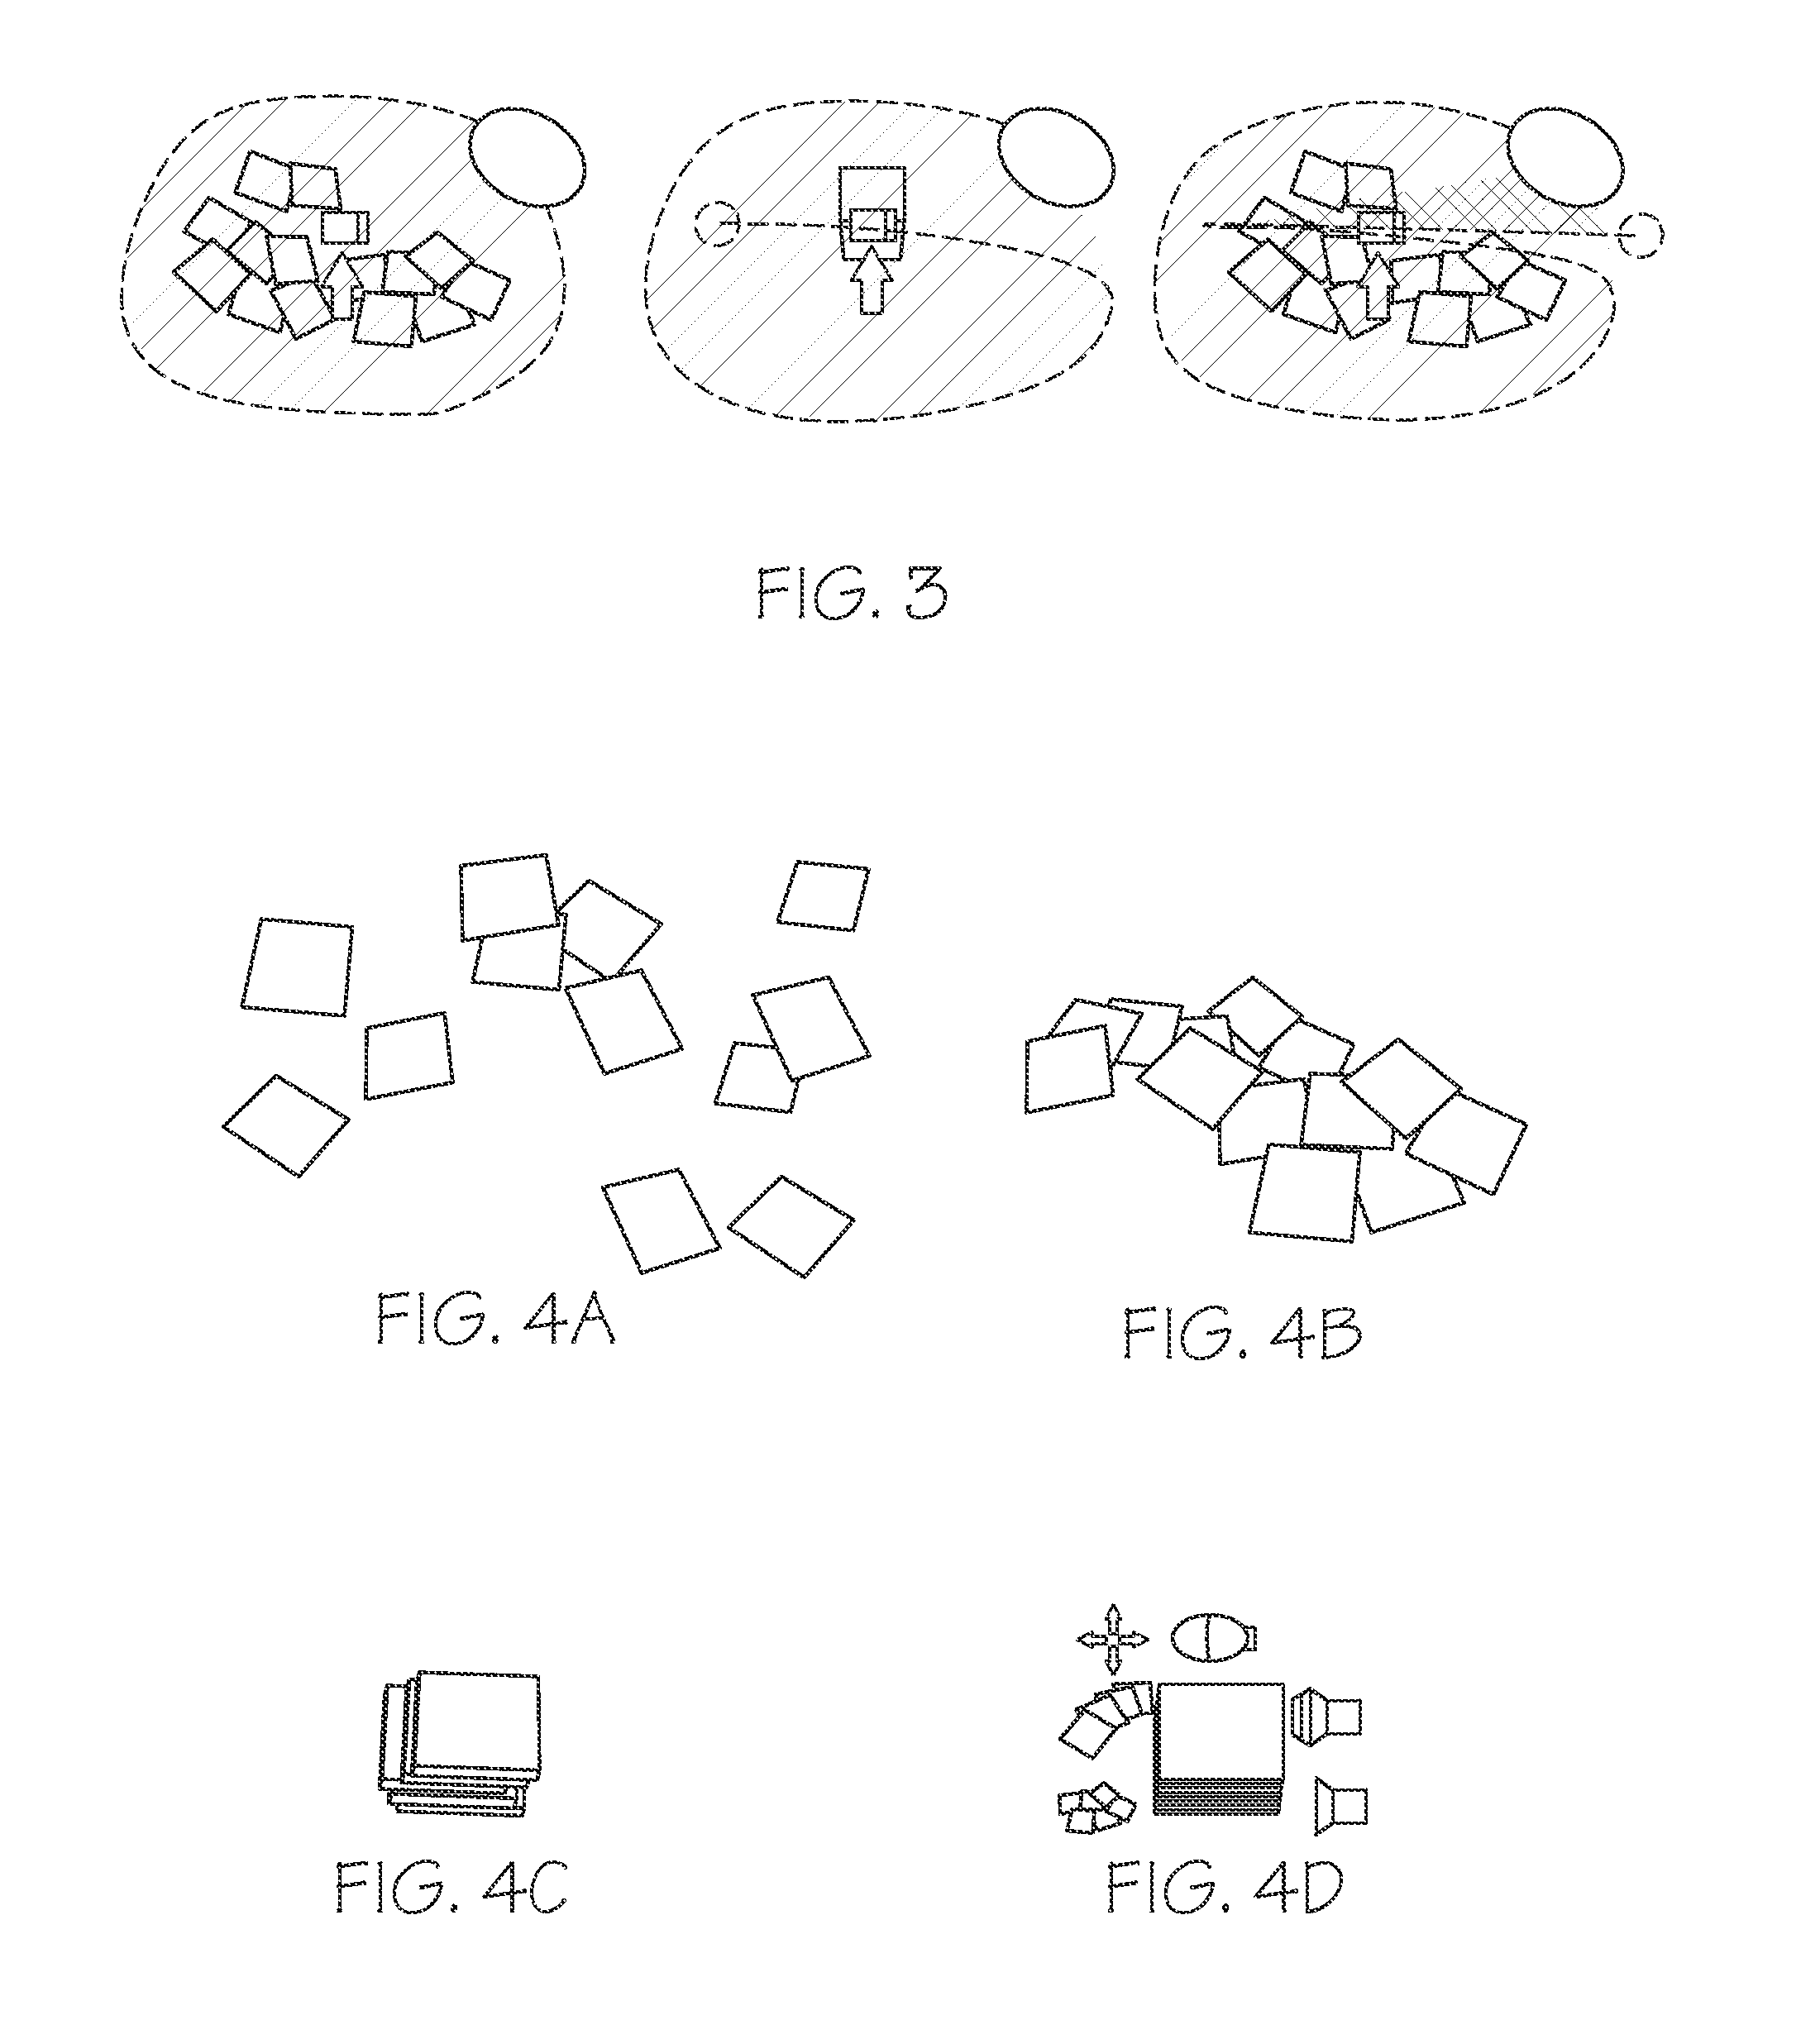 System for organizing and visualizing display objects